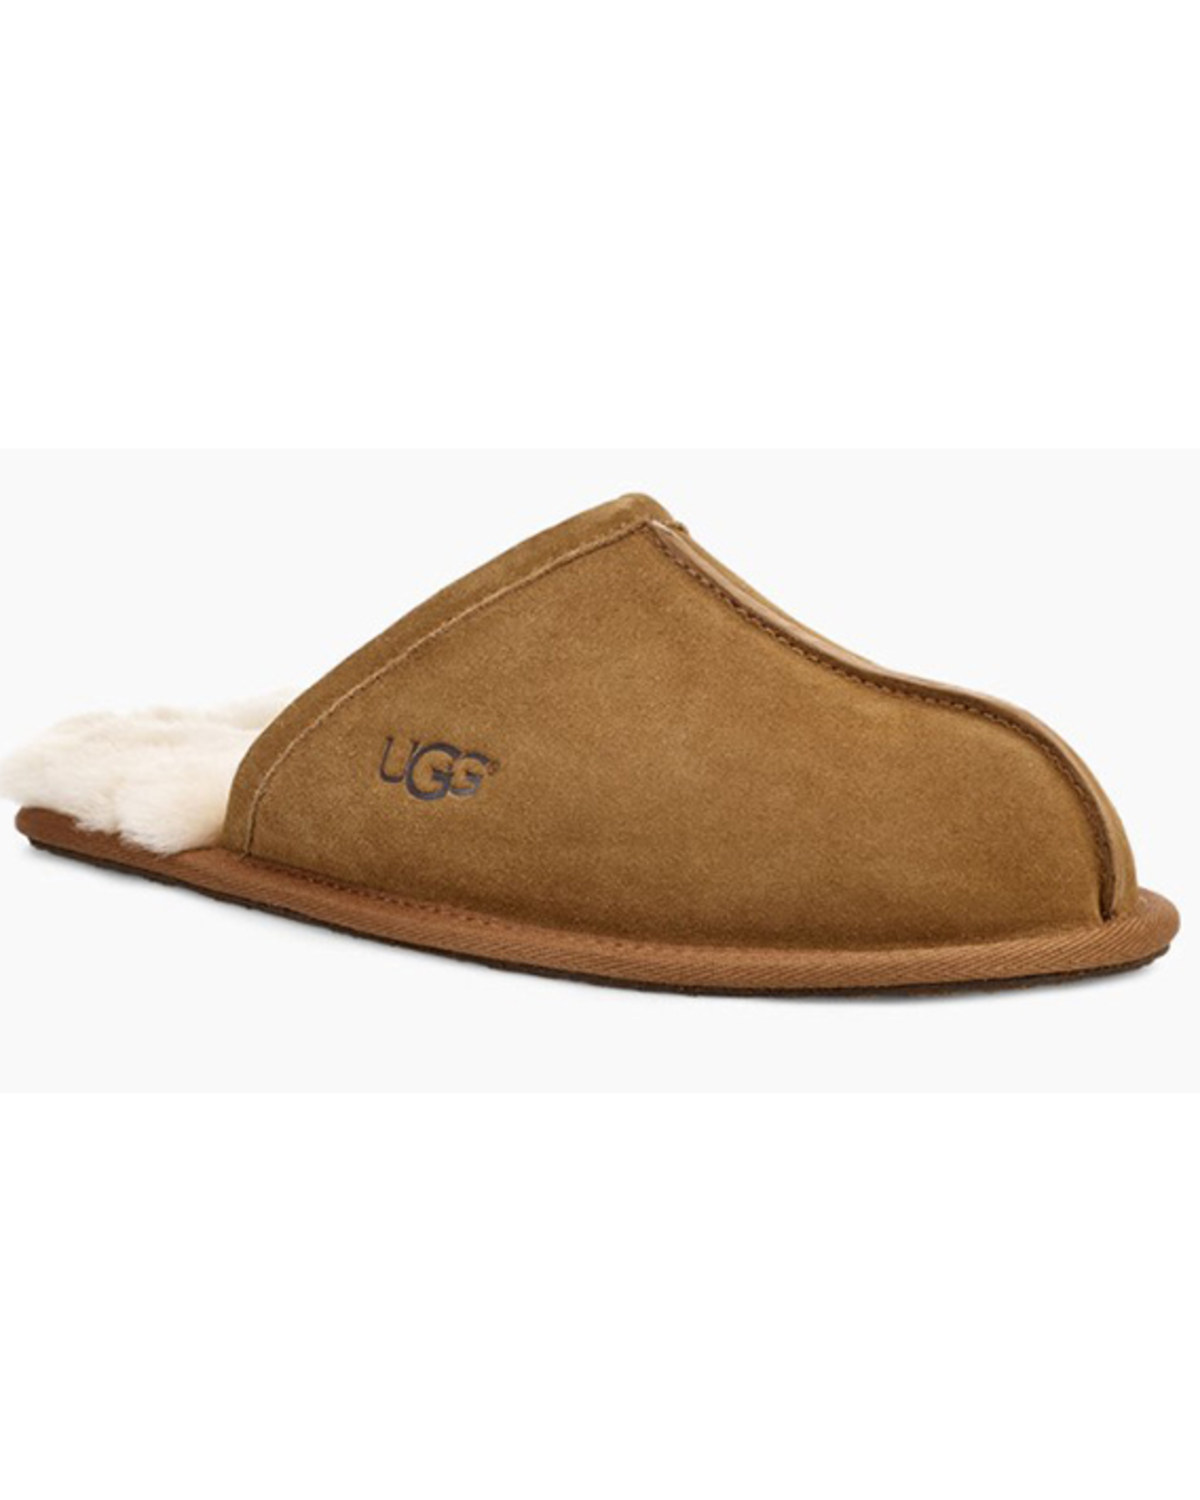 UGG Men's Scuff Suede House Slippers